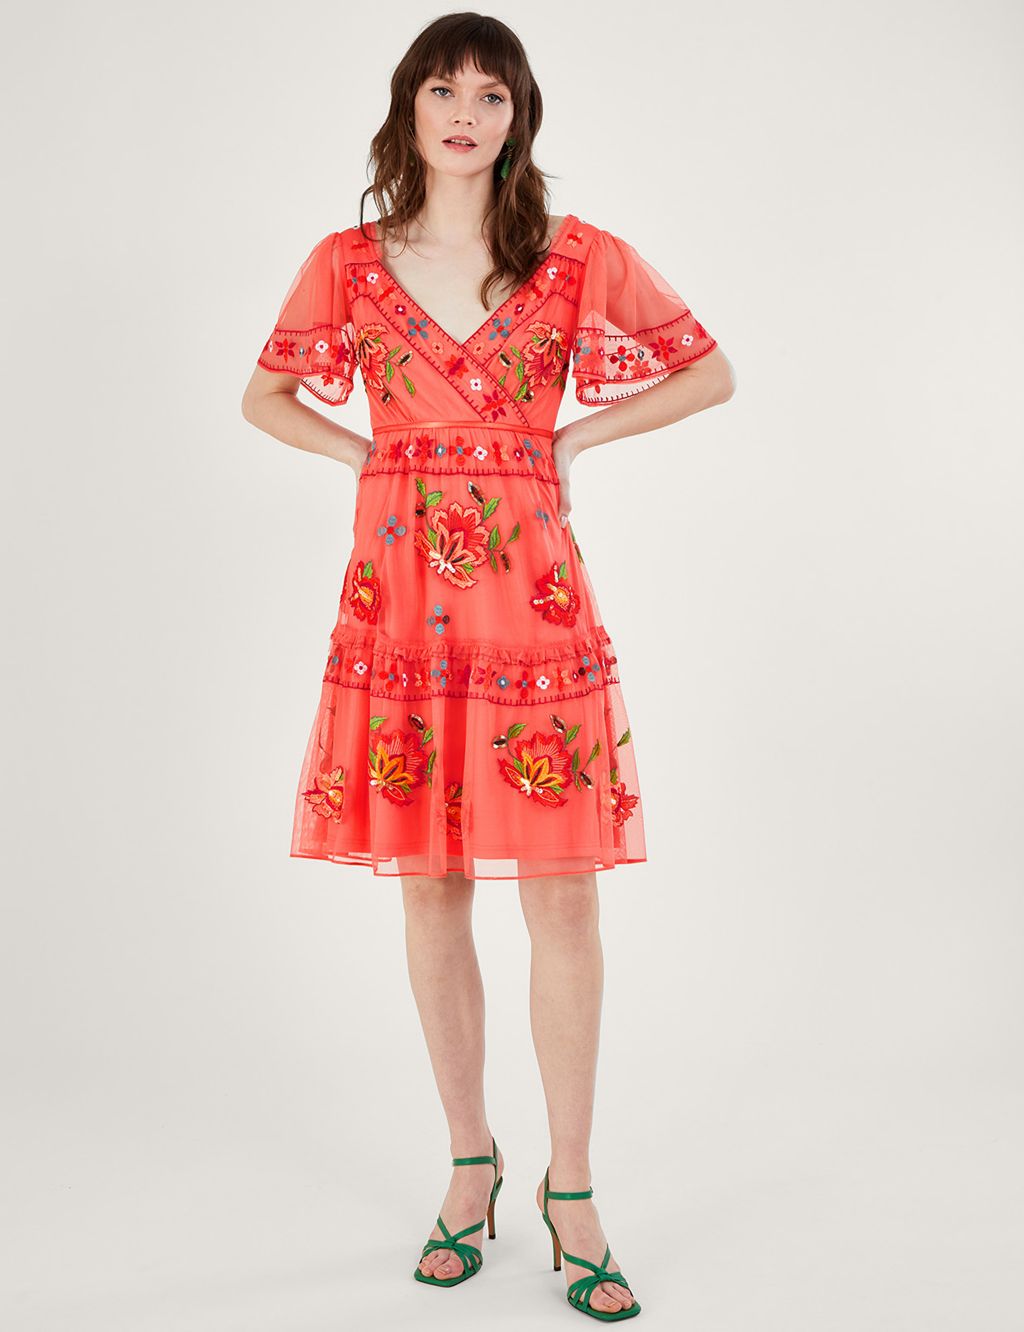 Ana Embroidered Tiered Dress image 1